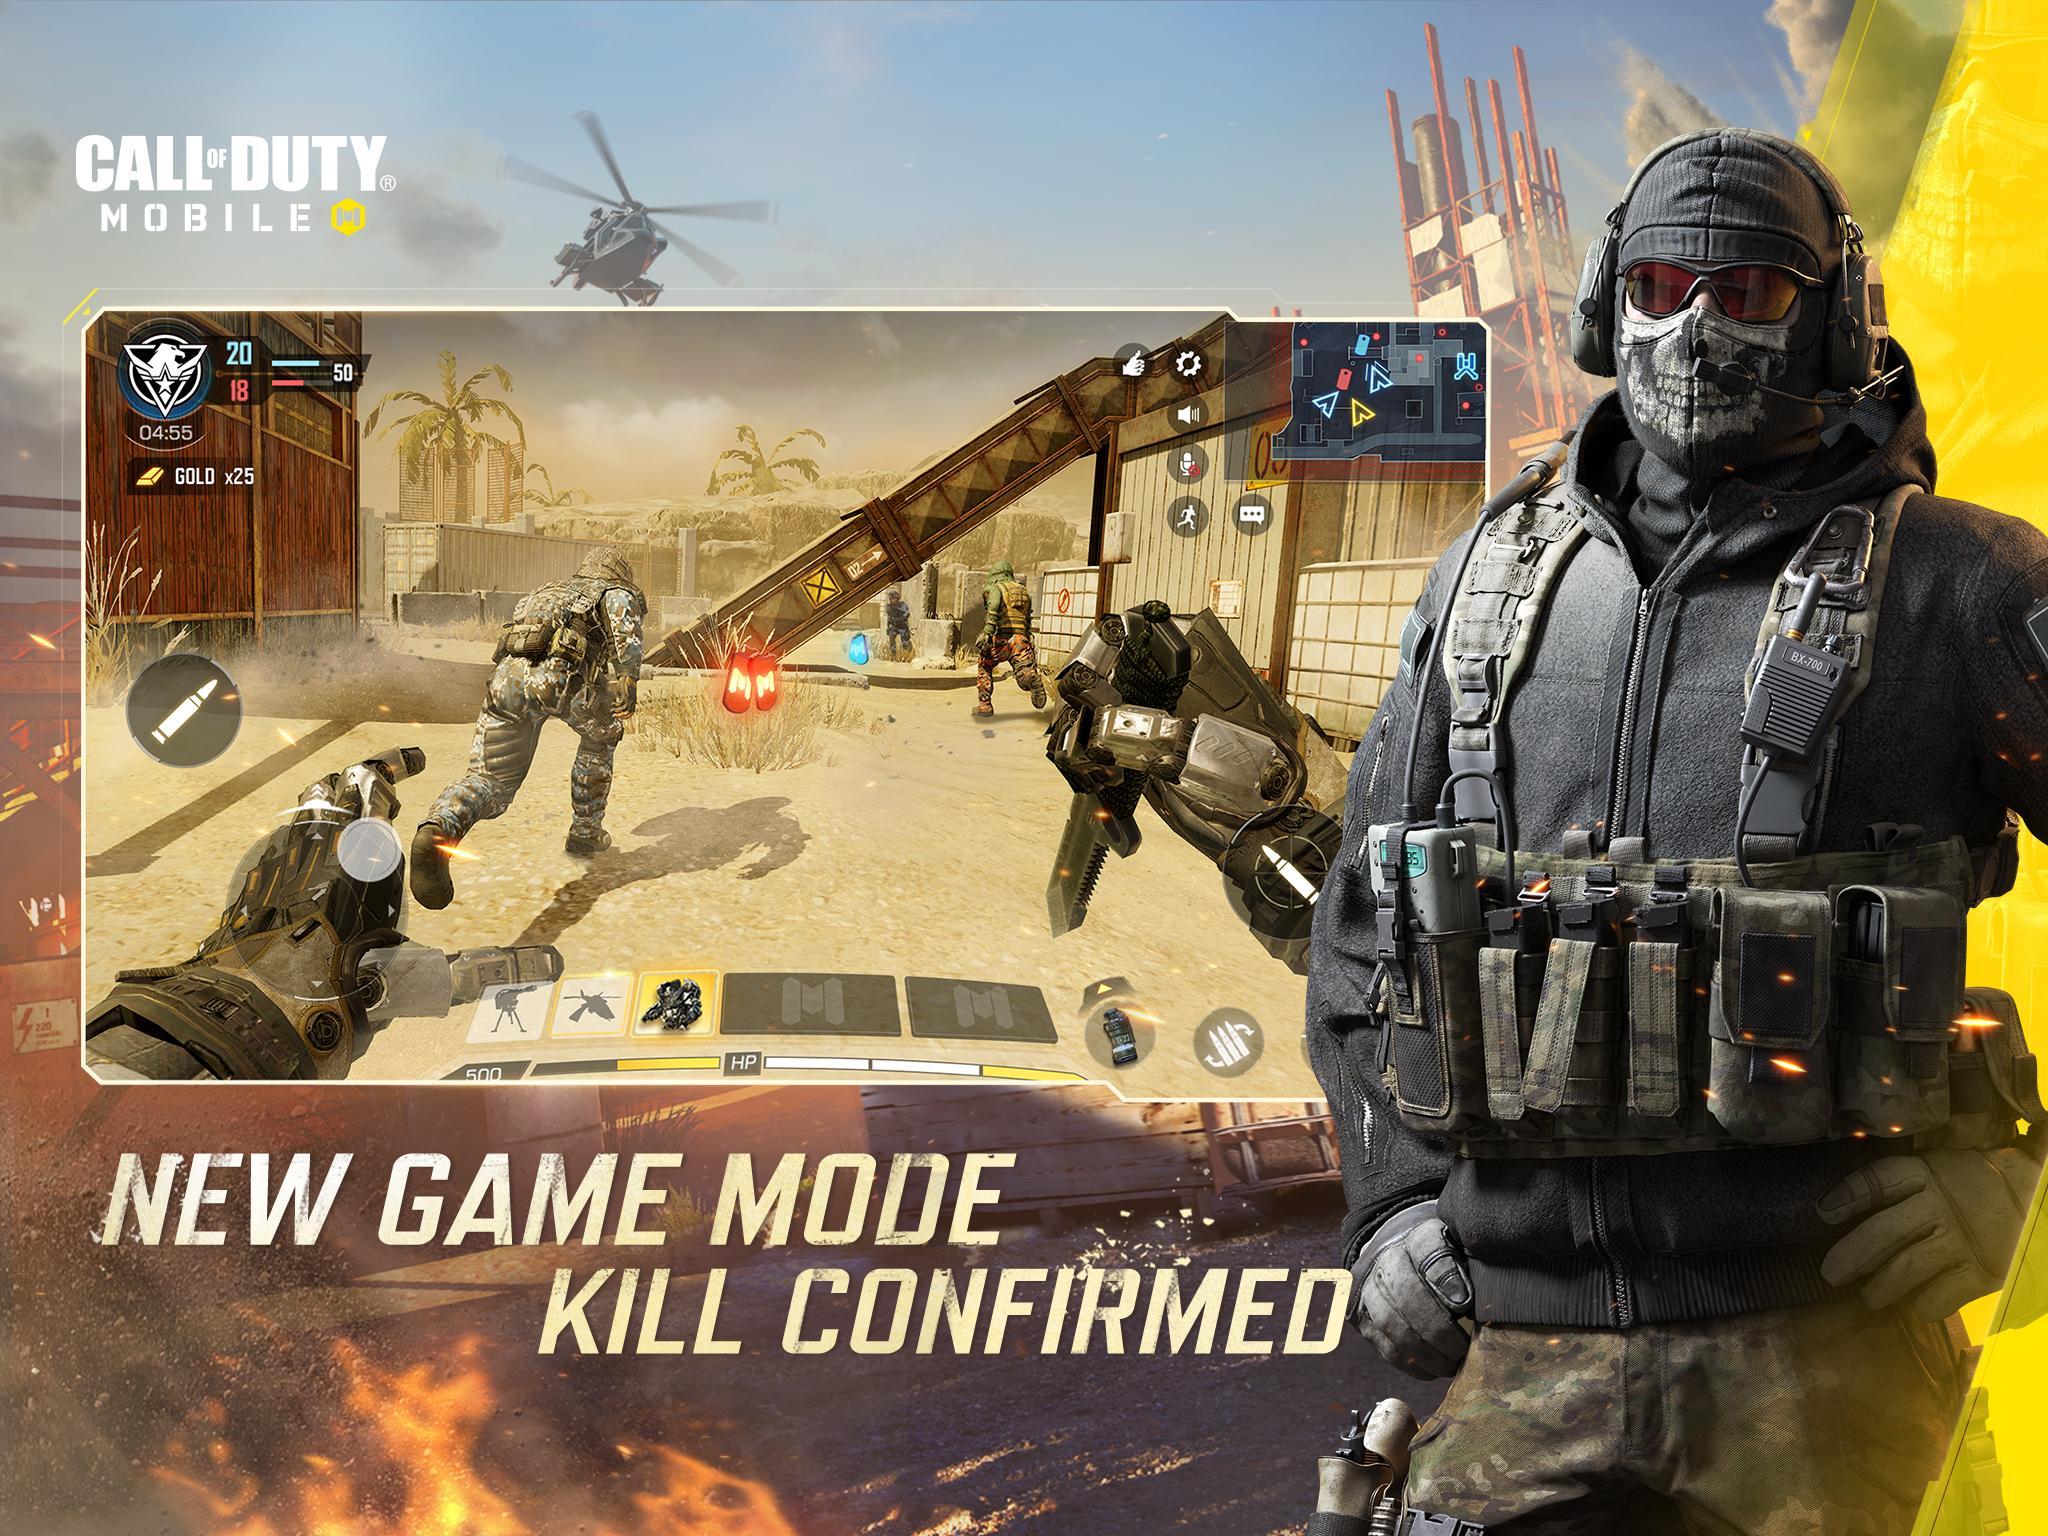 Call of duty mobile garena. Call of Duty mobile. Call of Duty mobile картинки. Garena версия Call of Duty.